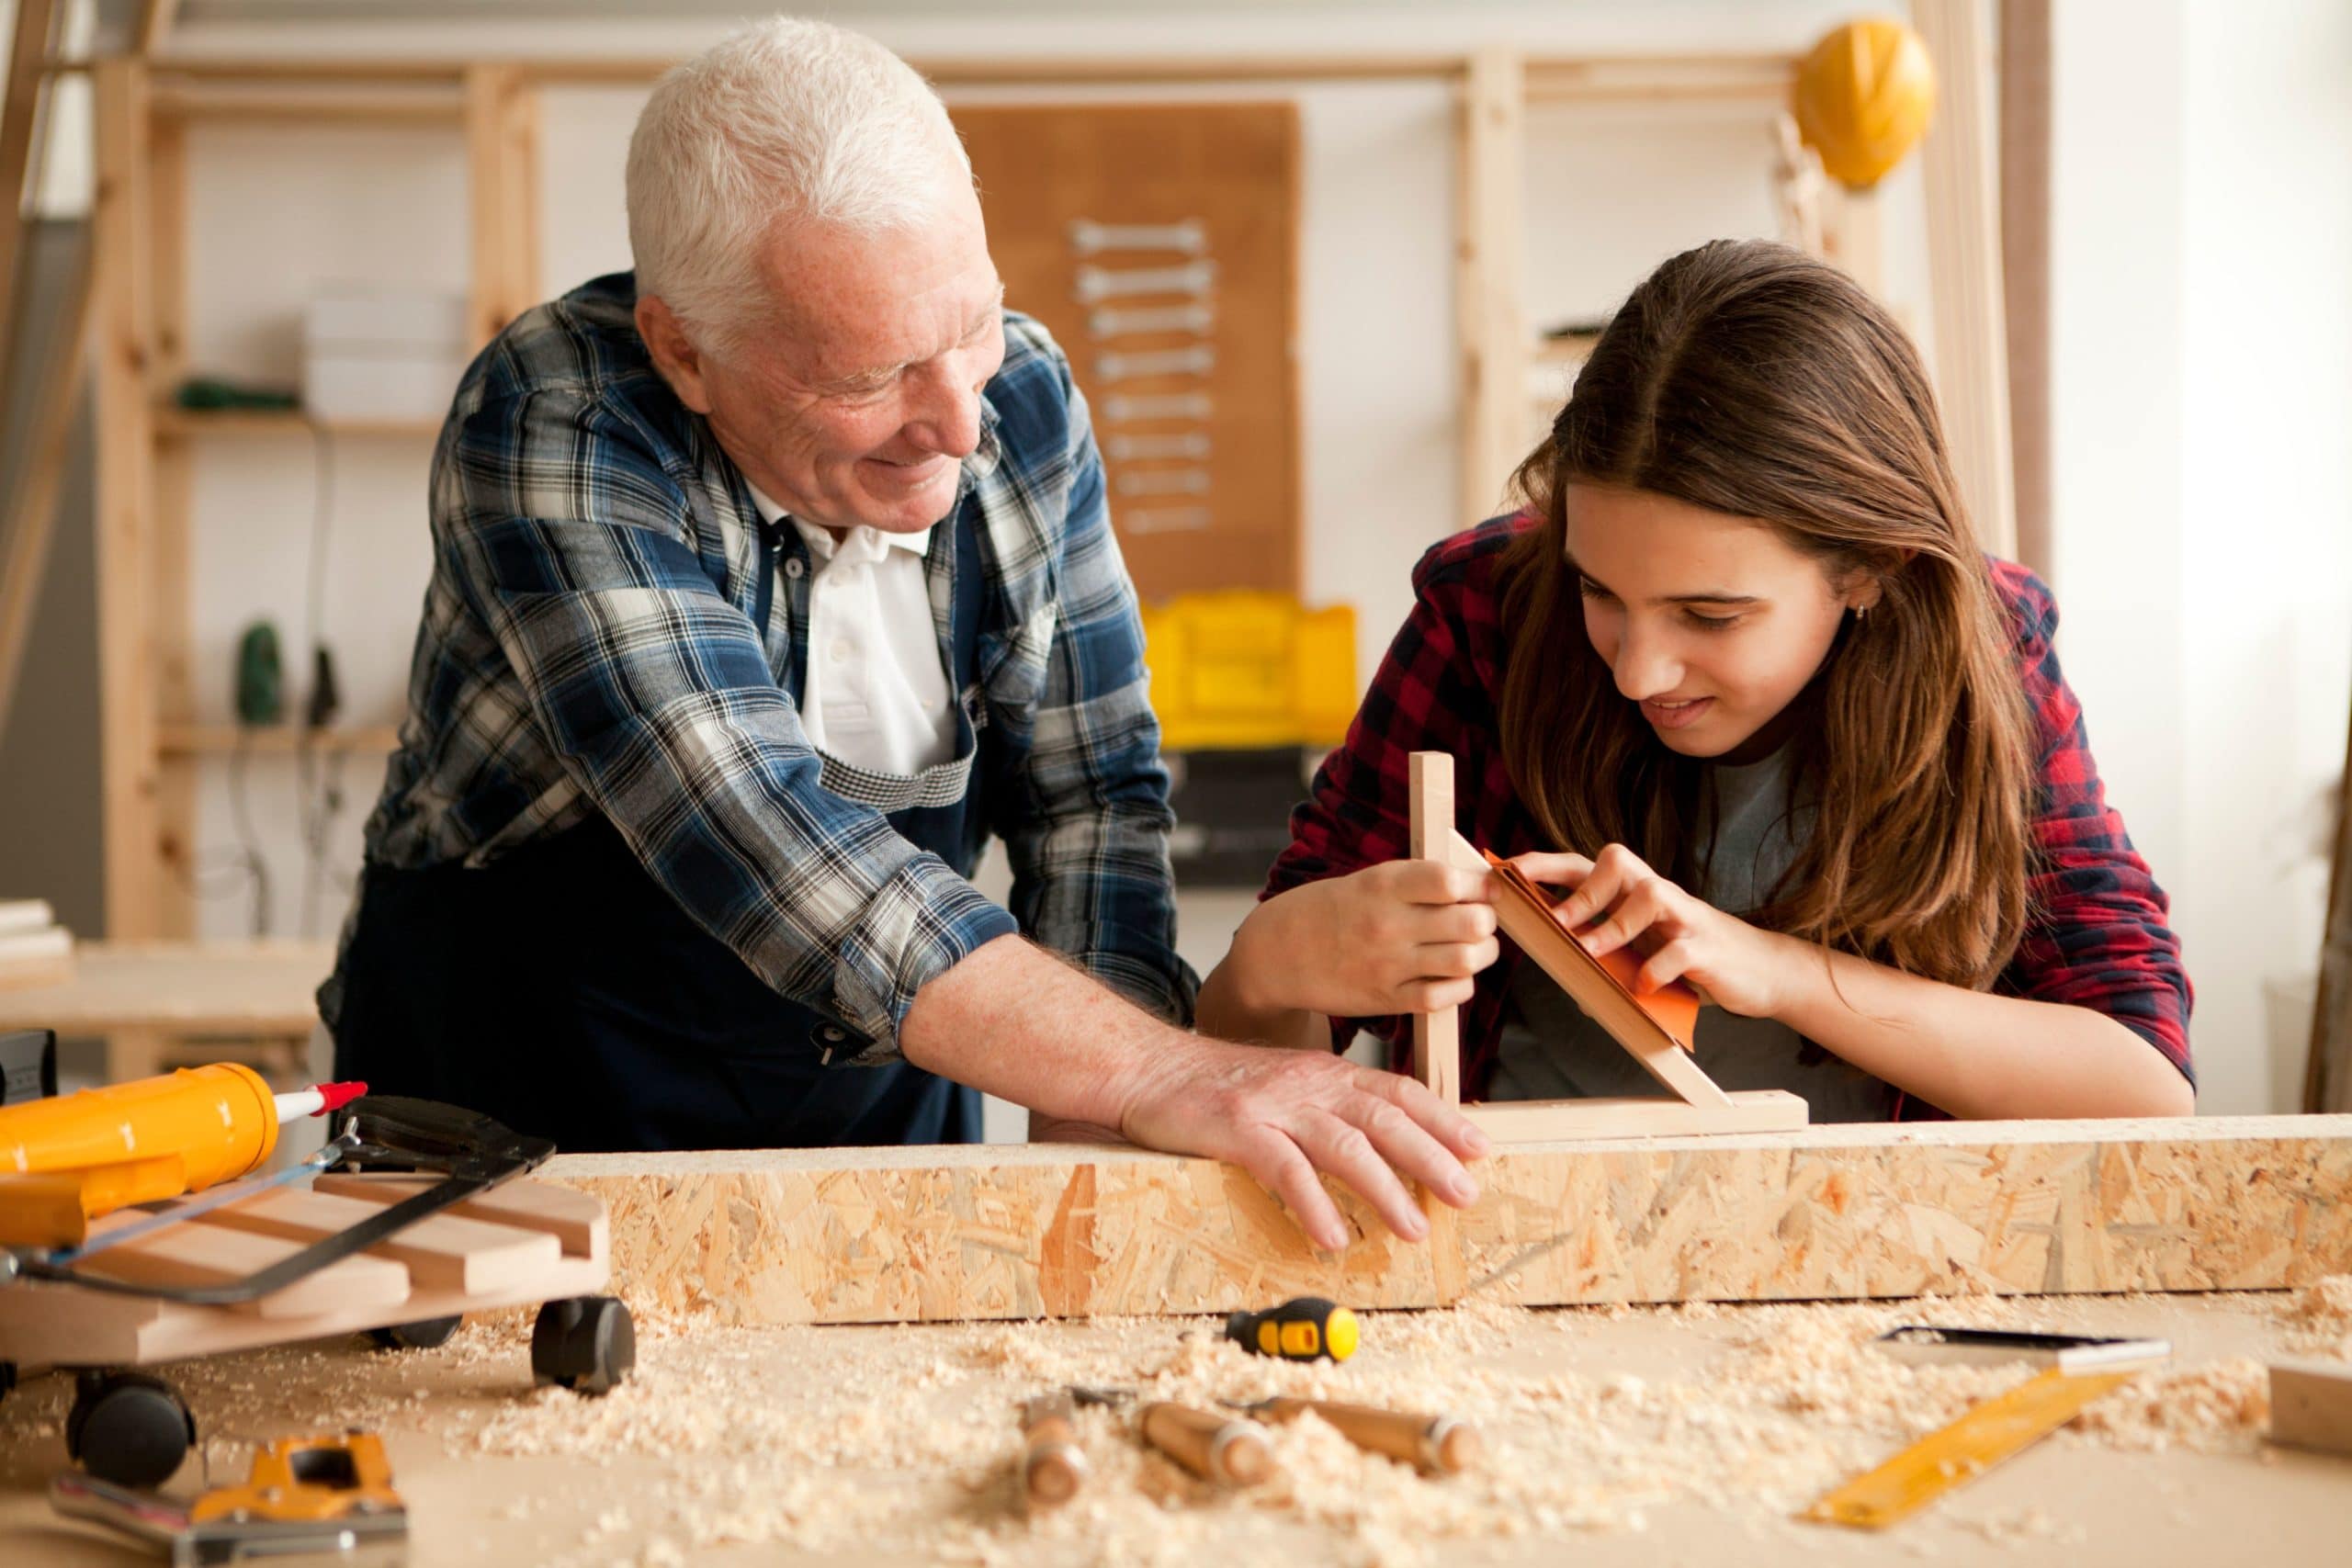 An older man and a girl work together on a wood working project in an outdoor building.